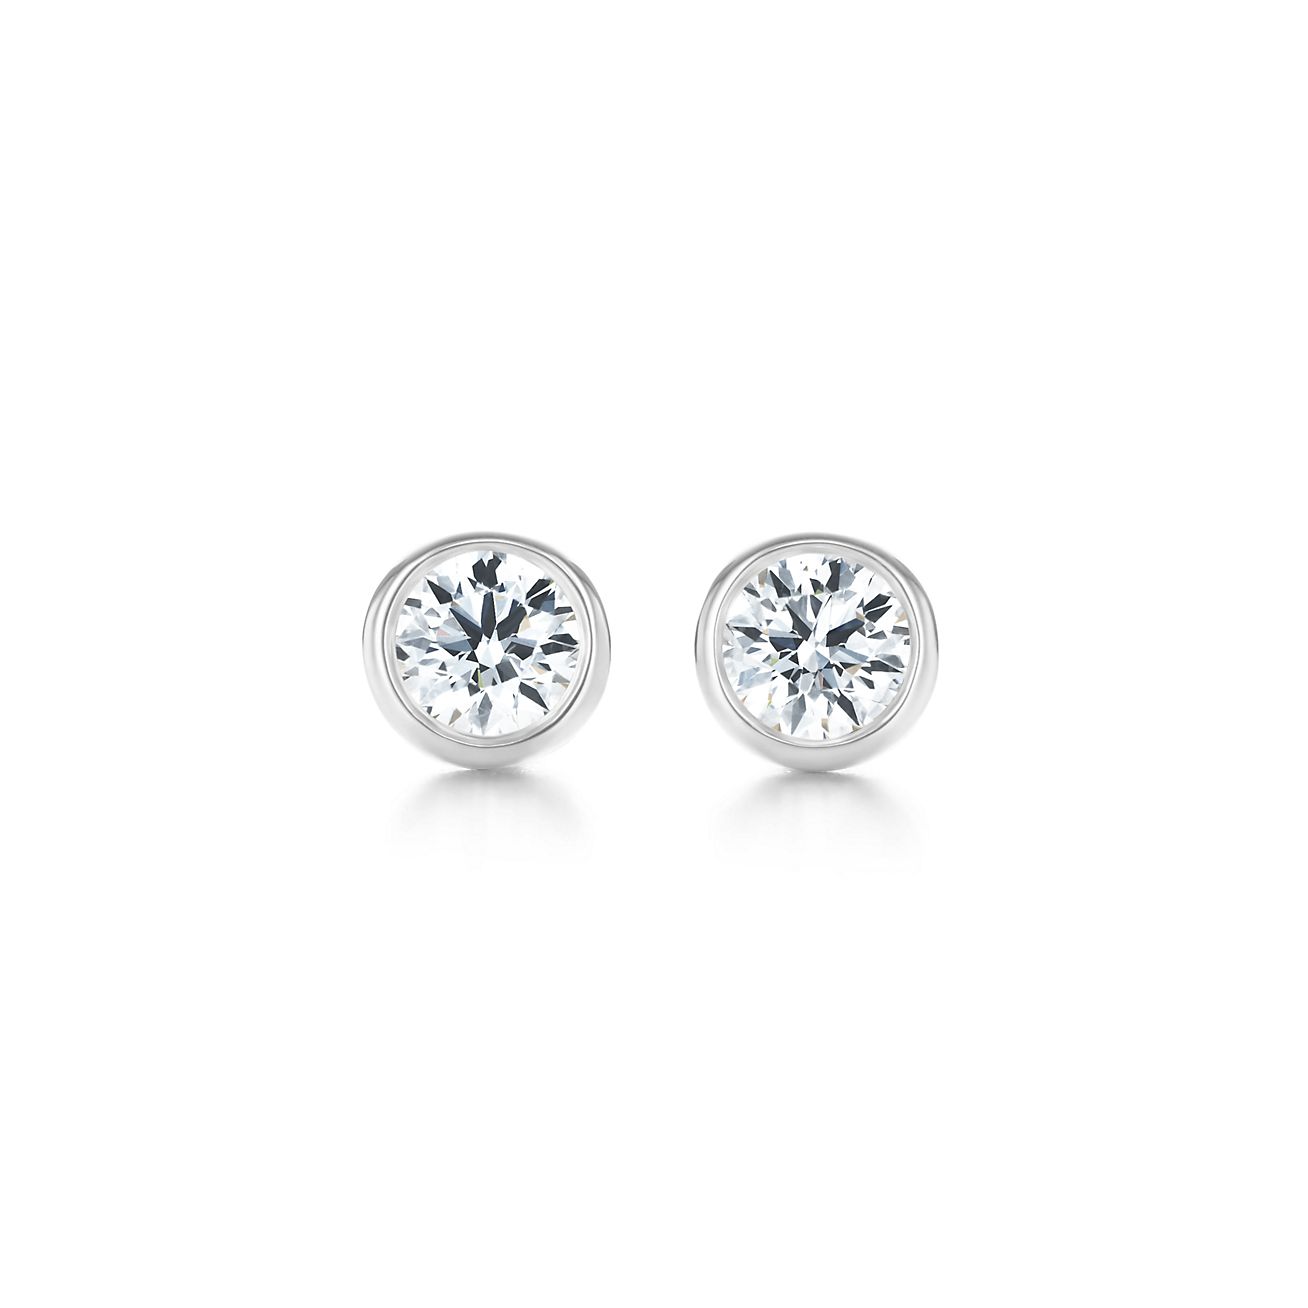 Buy Platinum Earrings With Diamonds JL PT E ST 2260 Online in India - Etsy